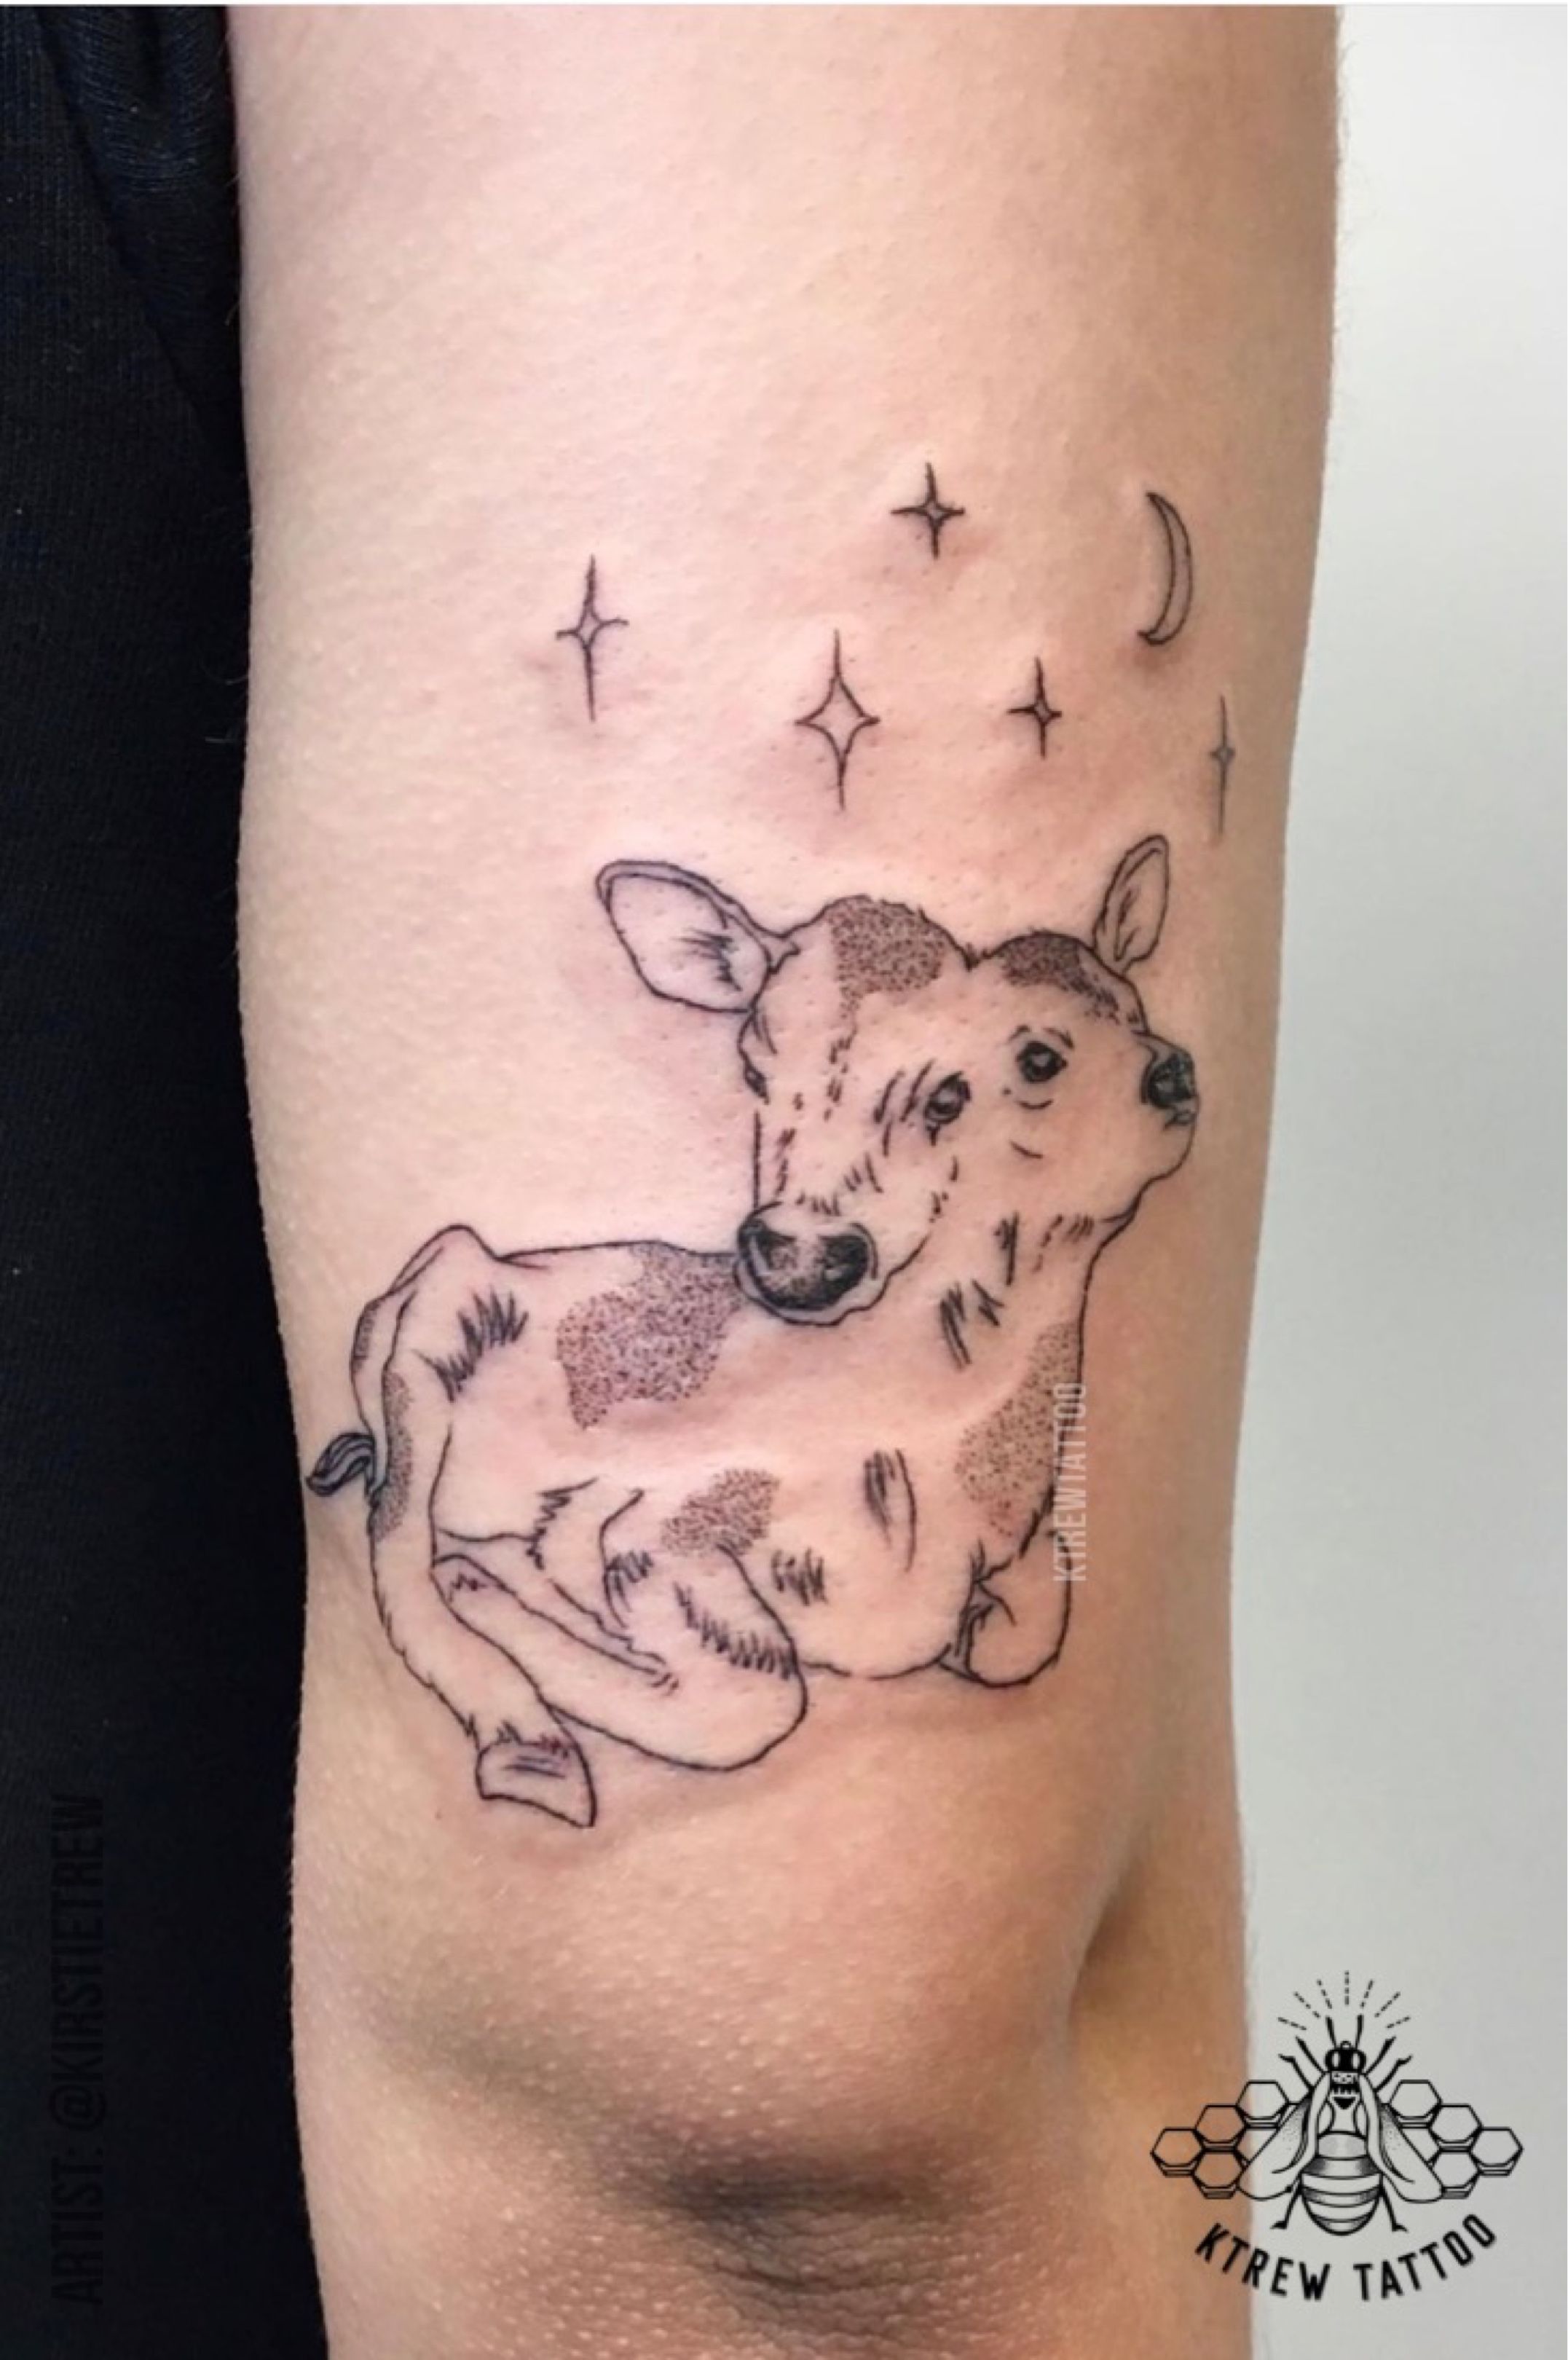 Twoheaded calf for Lindsay based on taxidermy from paxtongatepdx Done  with machine Thanks so much for y  Calf tattoo 2 headed animals tattoo  Animal tattoos